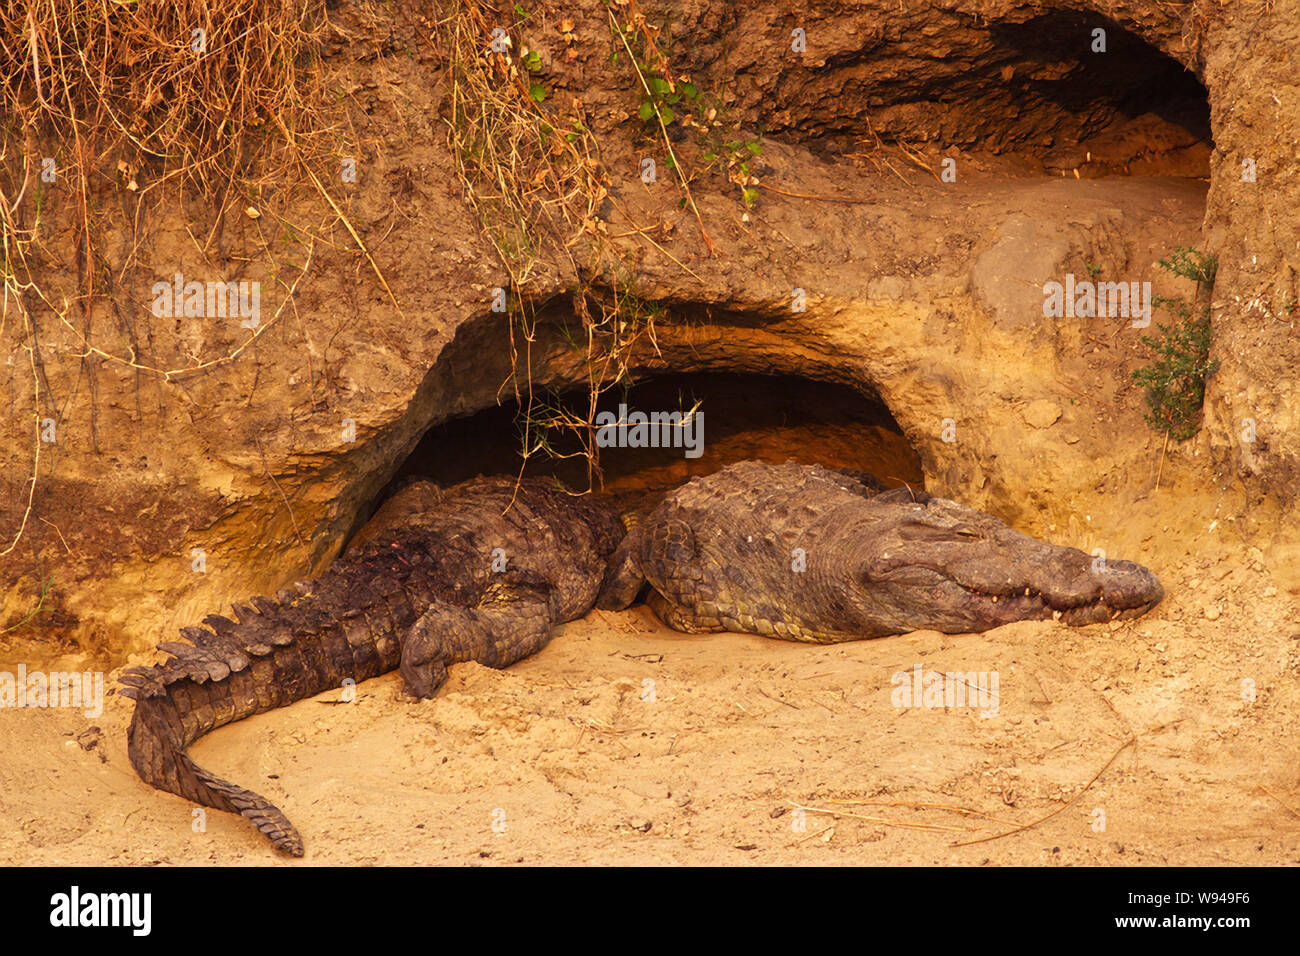 A pair of Crocodiles rest in the last rays of warming sunlight in front of the cave they will take shelter in from the intense heat. Katavi is famous Stock Photo